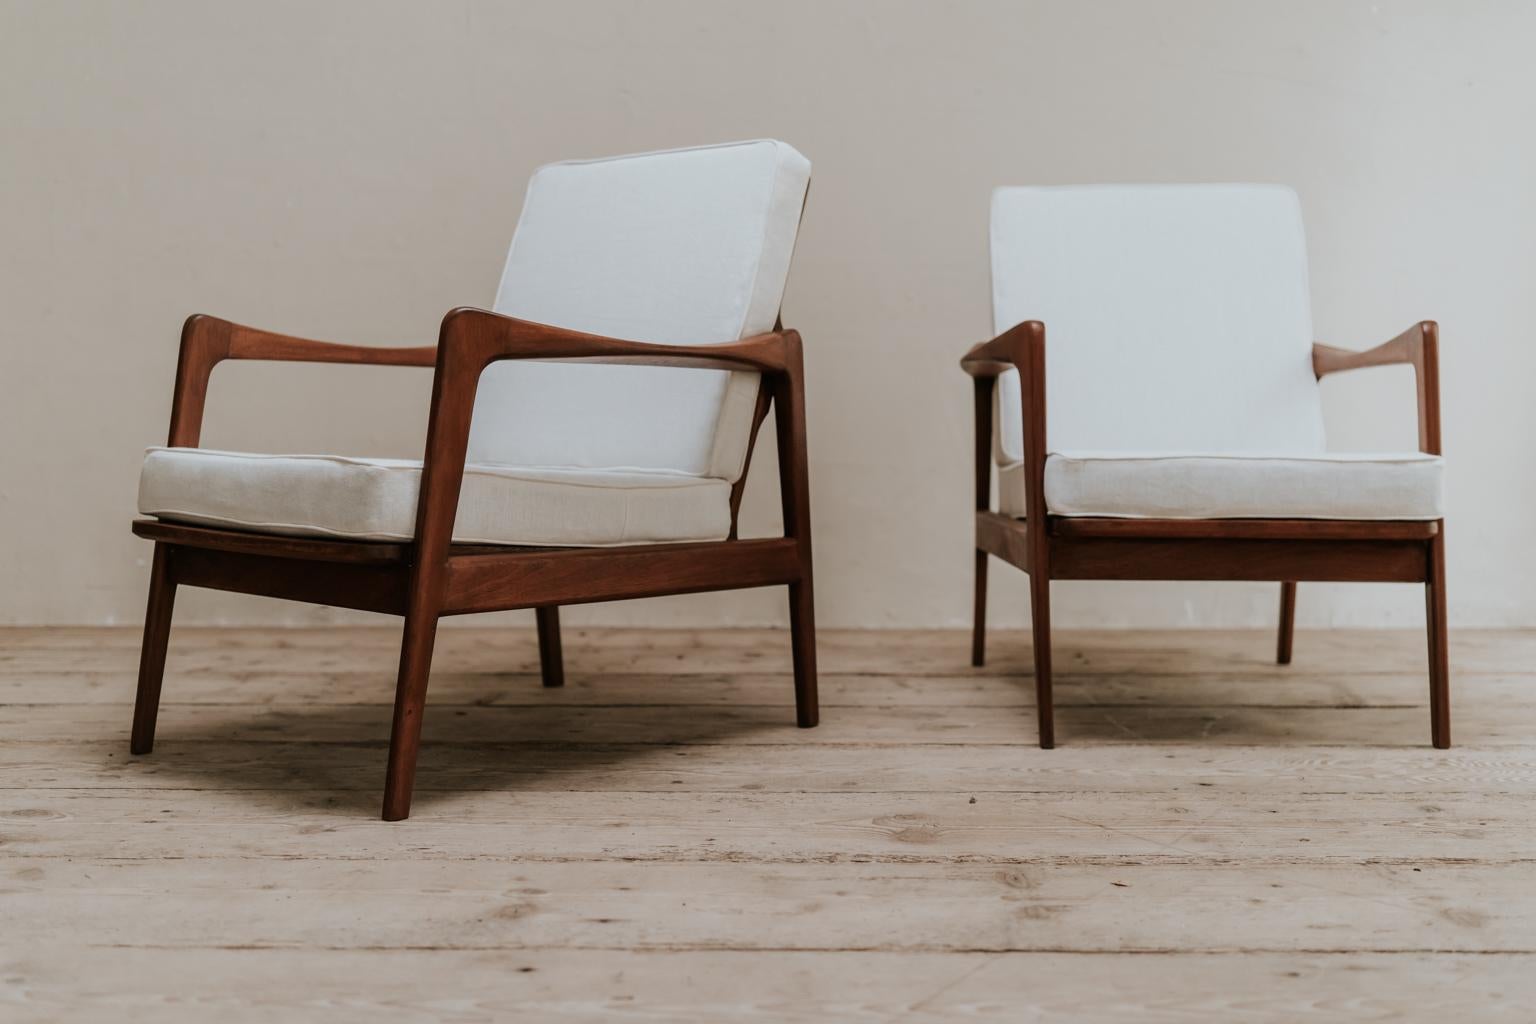 Great lines on this pair of midcentury armchairs, in great condition.